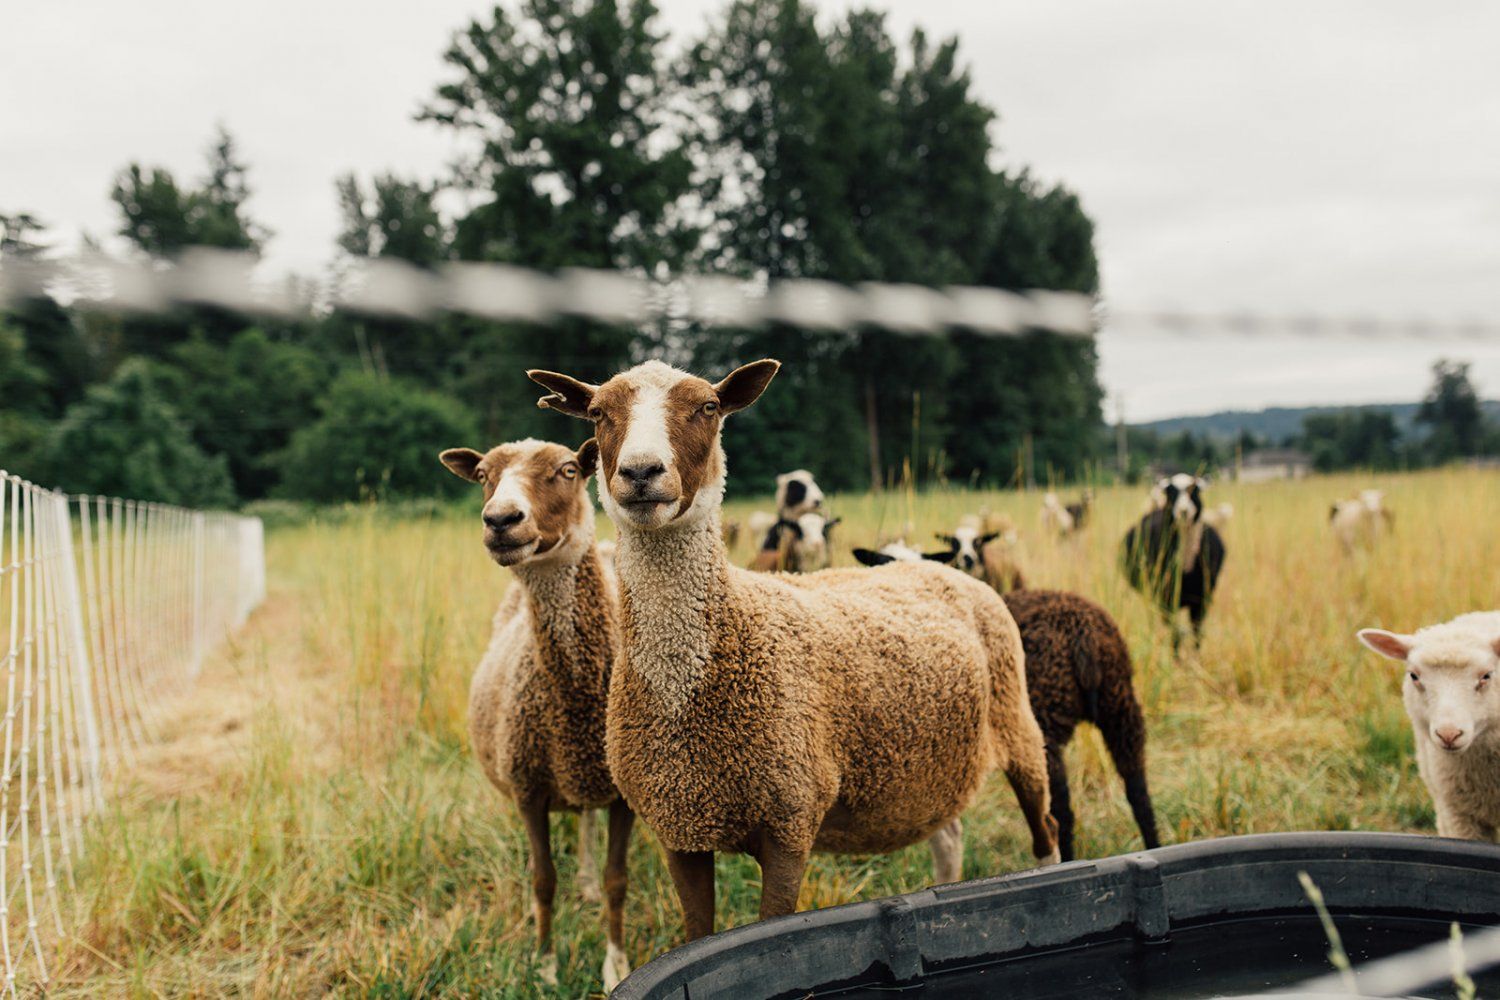 Farm Happenings for July 29, 2021: Hot Sheep Summer